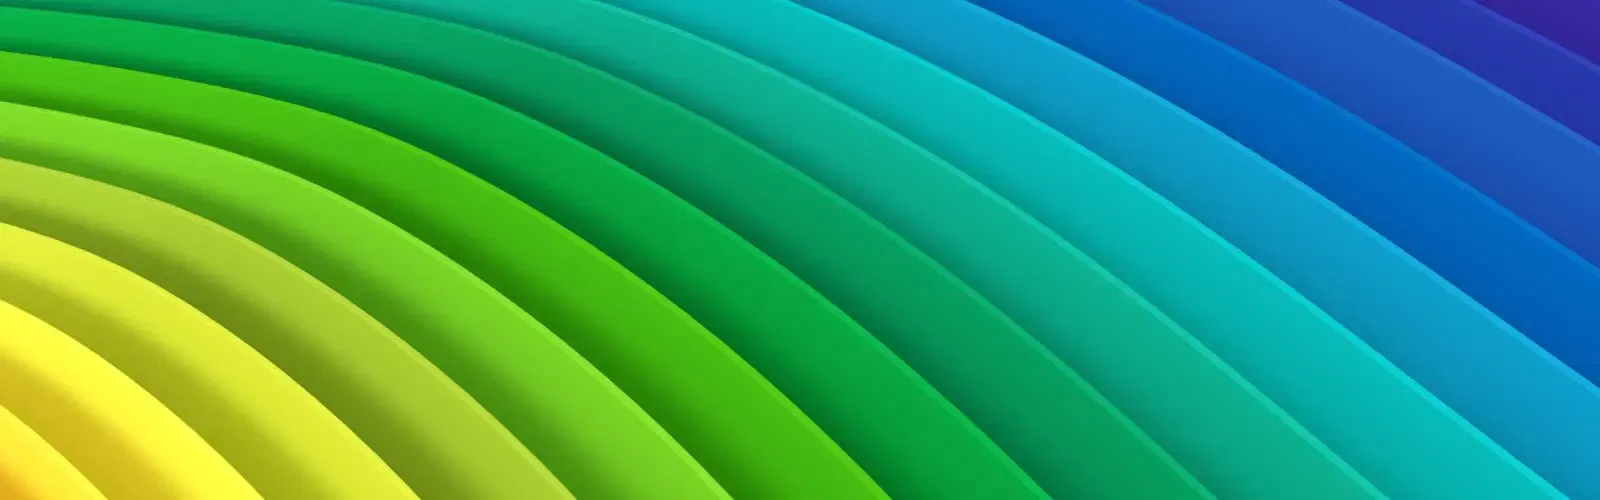 Yellow green and blue waves image background